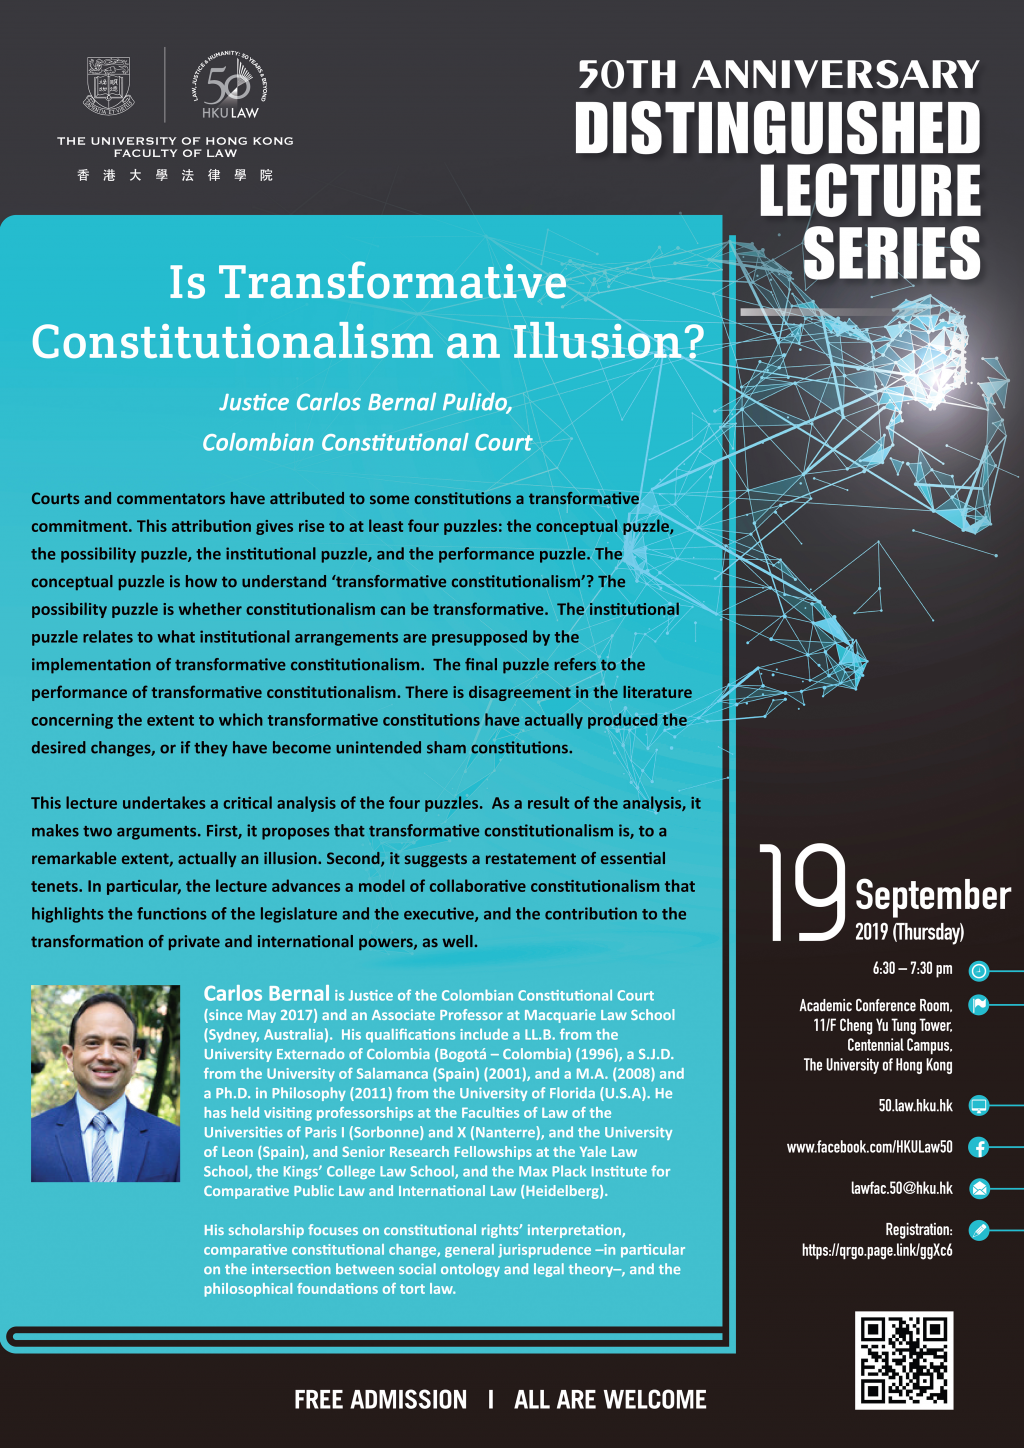 [50th Anniversary Distinguished Lecture] Is Transformative Constitutionalism an Illusion?